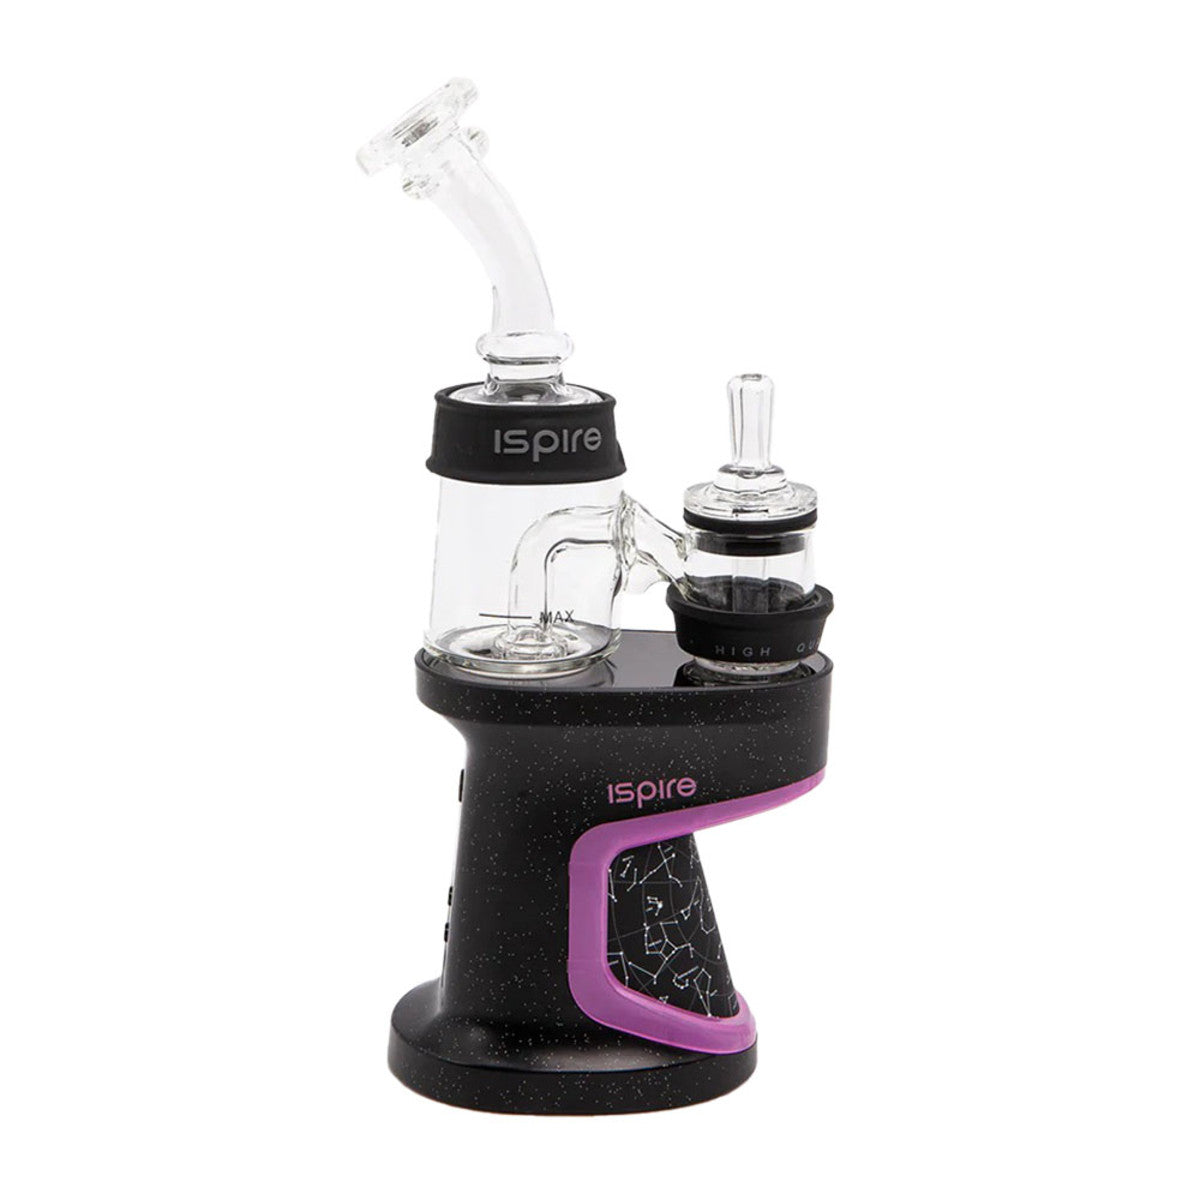 Ispire Daab Astro Limited Edition Electronic Dab Rig